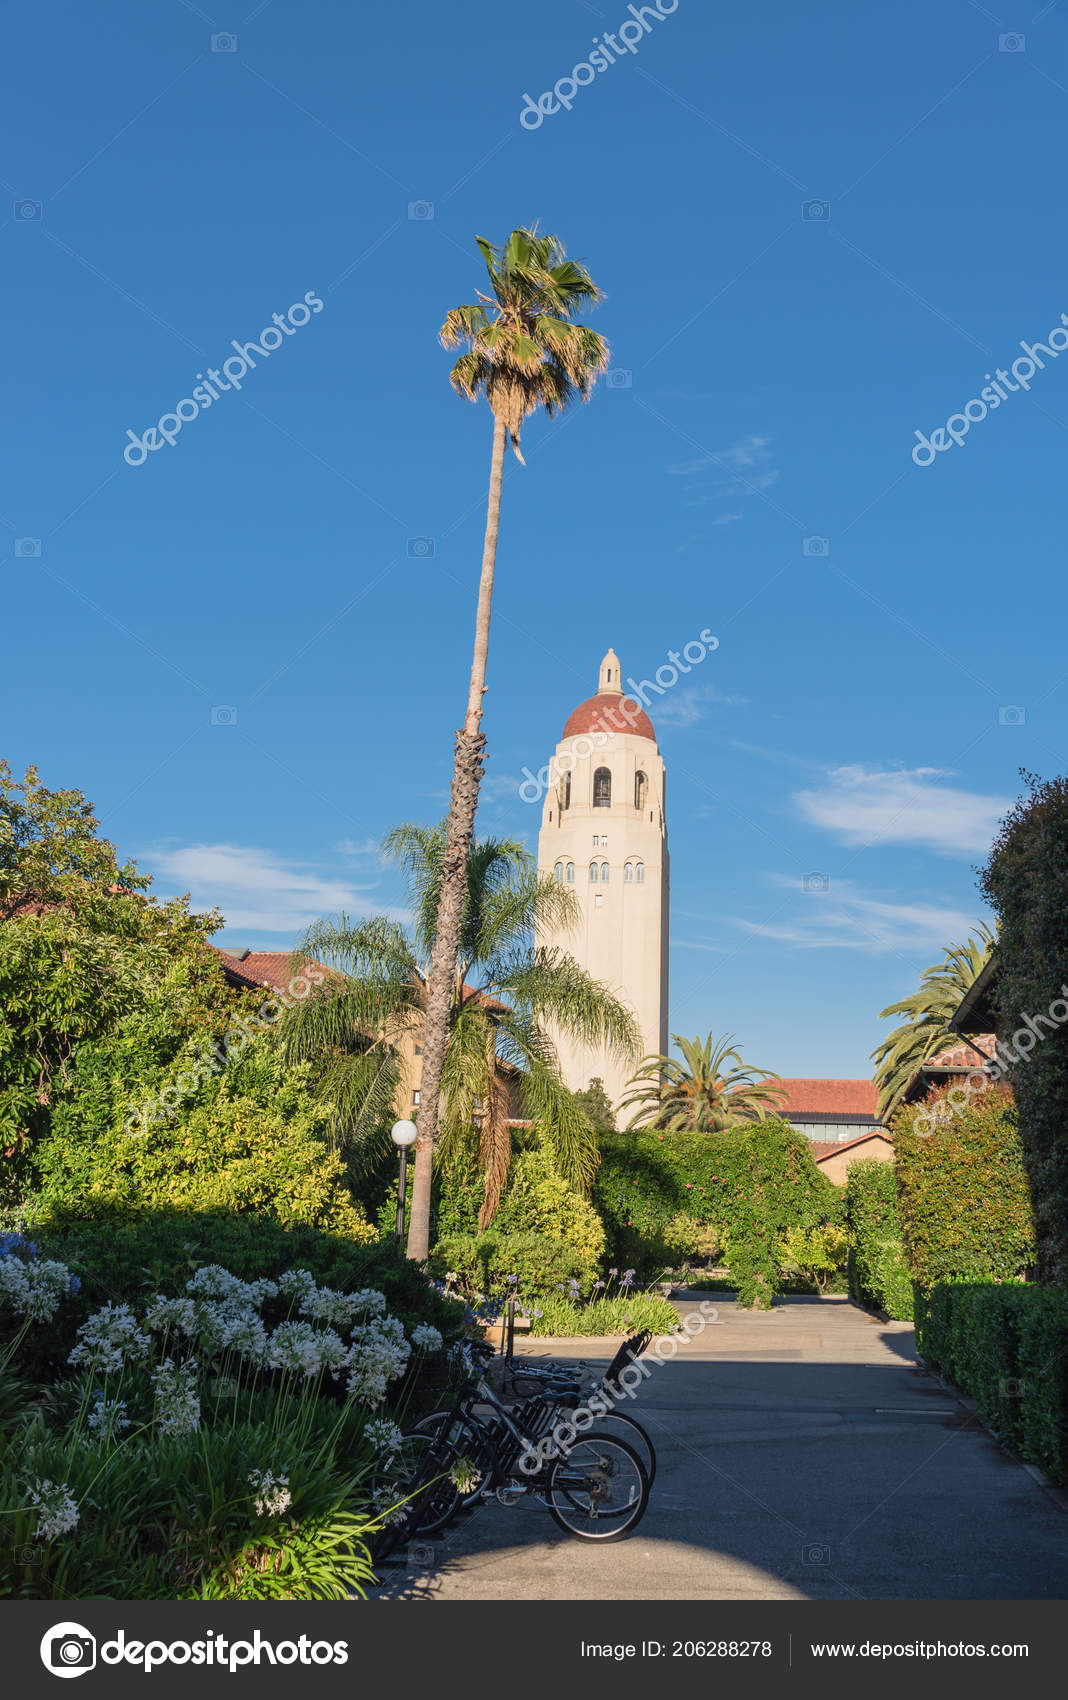 Awesome Hoover Tower Stanford University Palo Alto - Tree , HD Wallpaper & Backgrounds